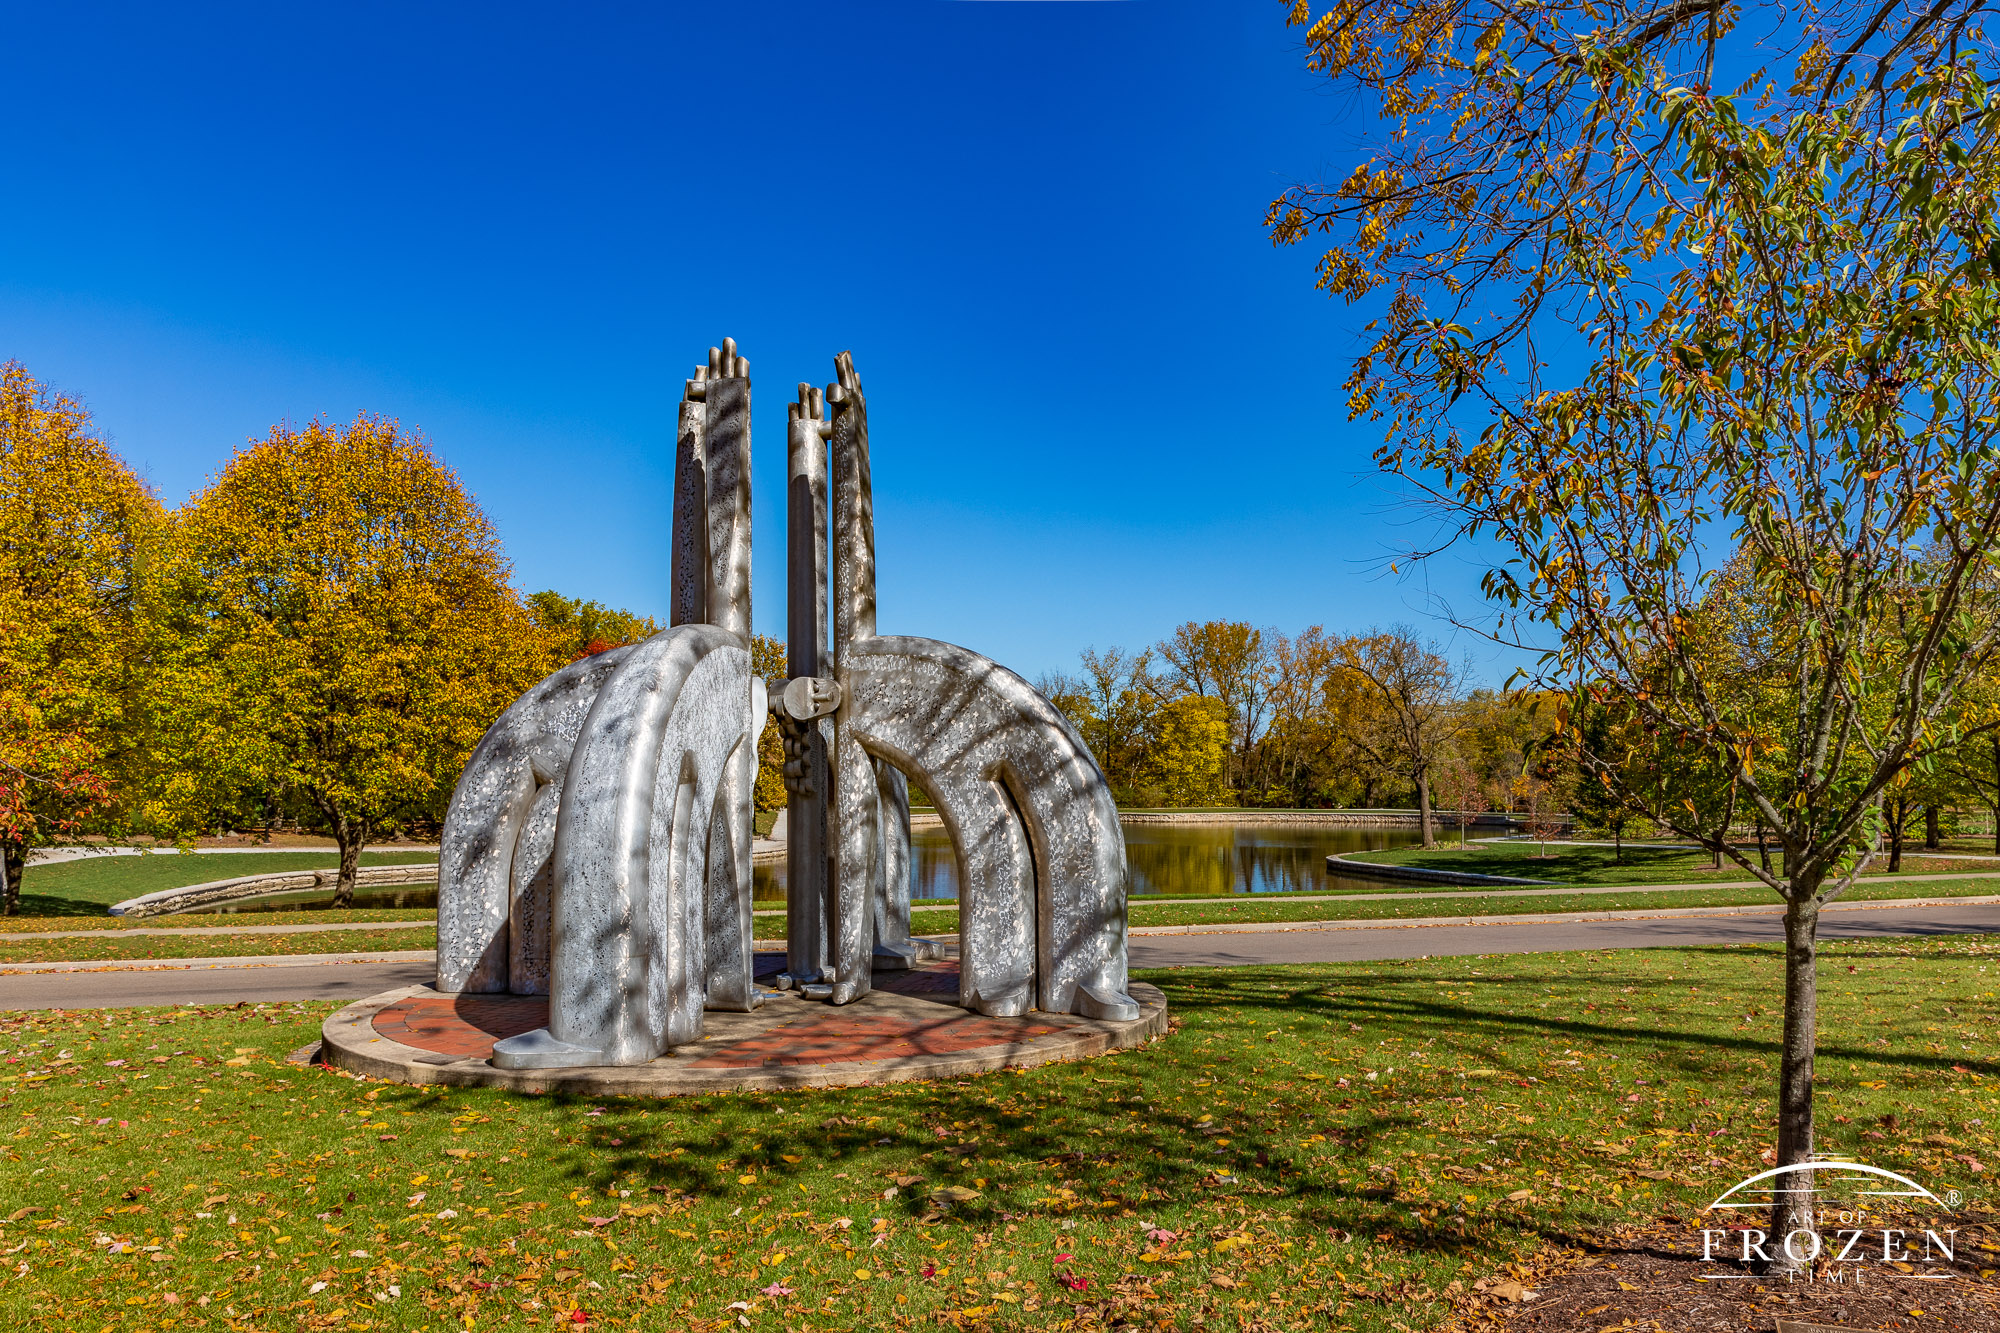 A fanciful sculpture in Lincoln Park which features aluminized people with outstreched arms which stretch from the ground towards the blue sky during an early fall day